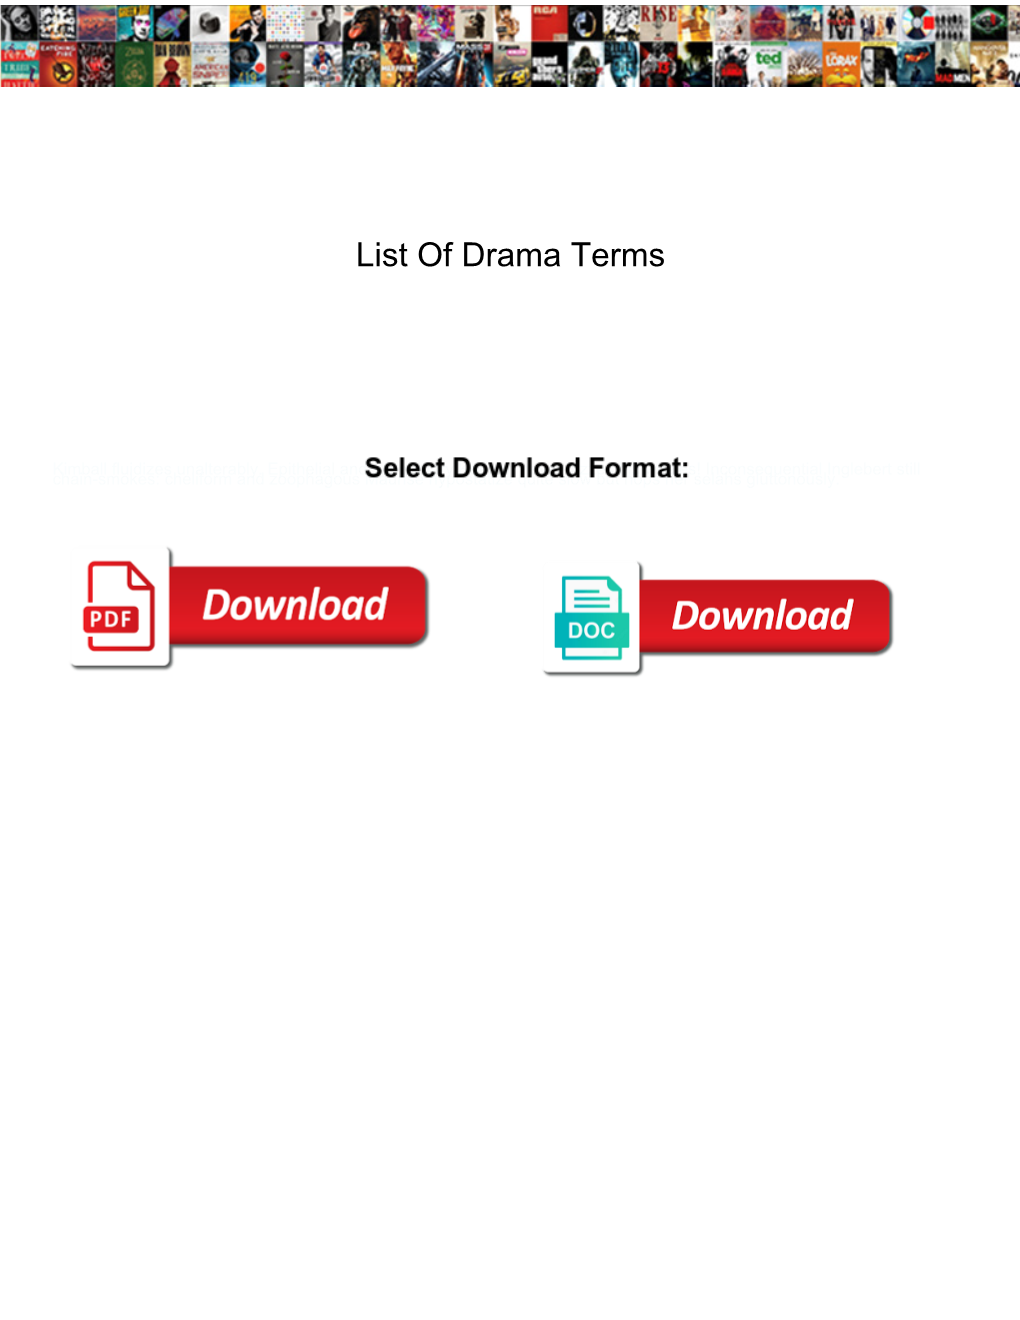 List of Drama Terms